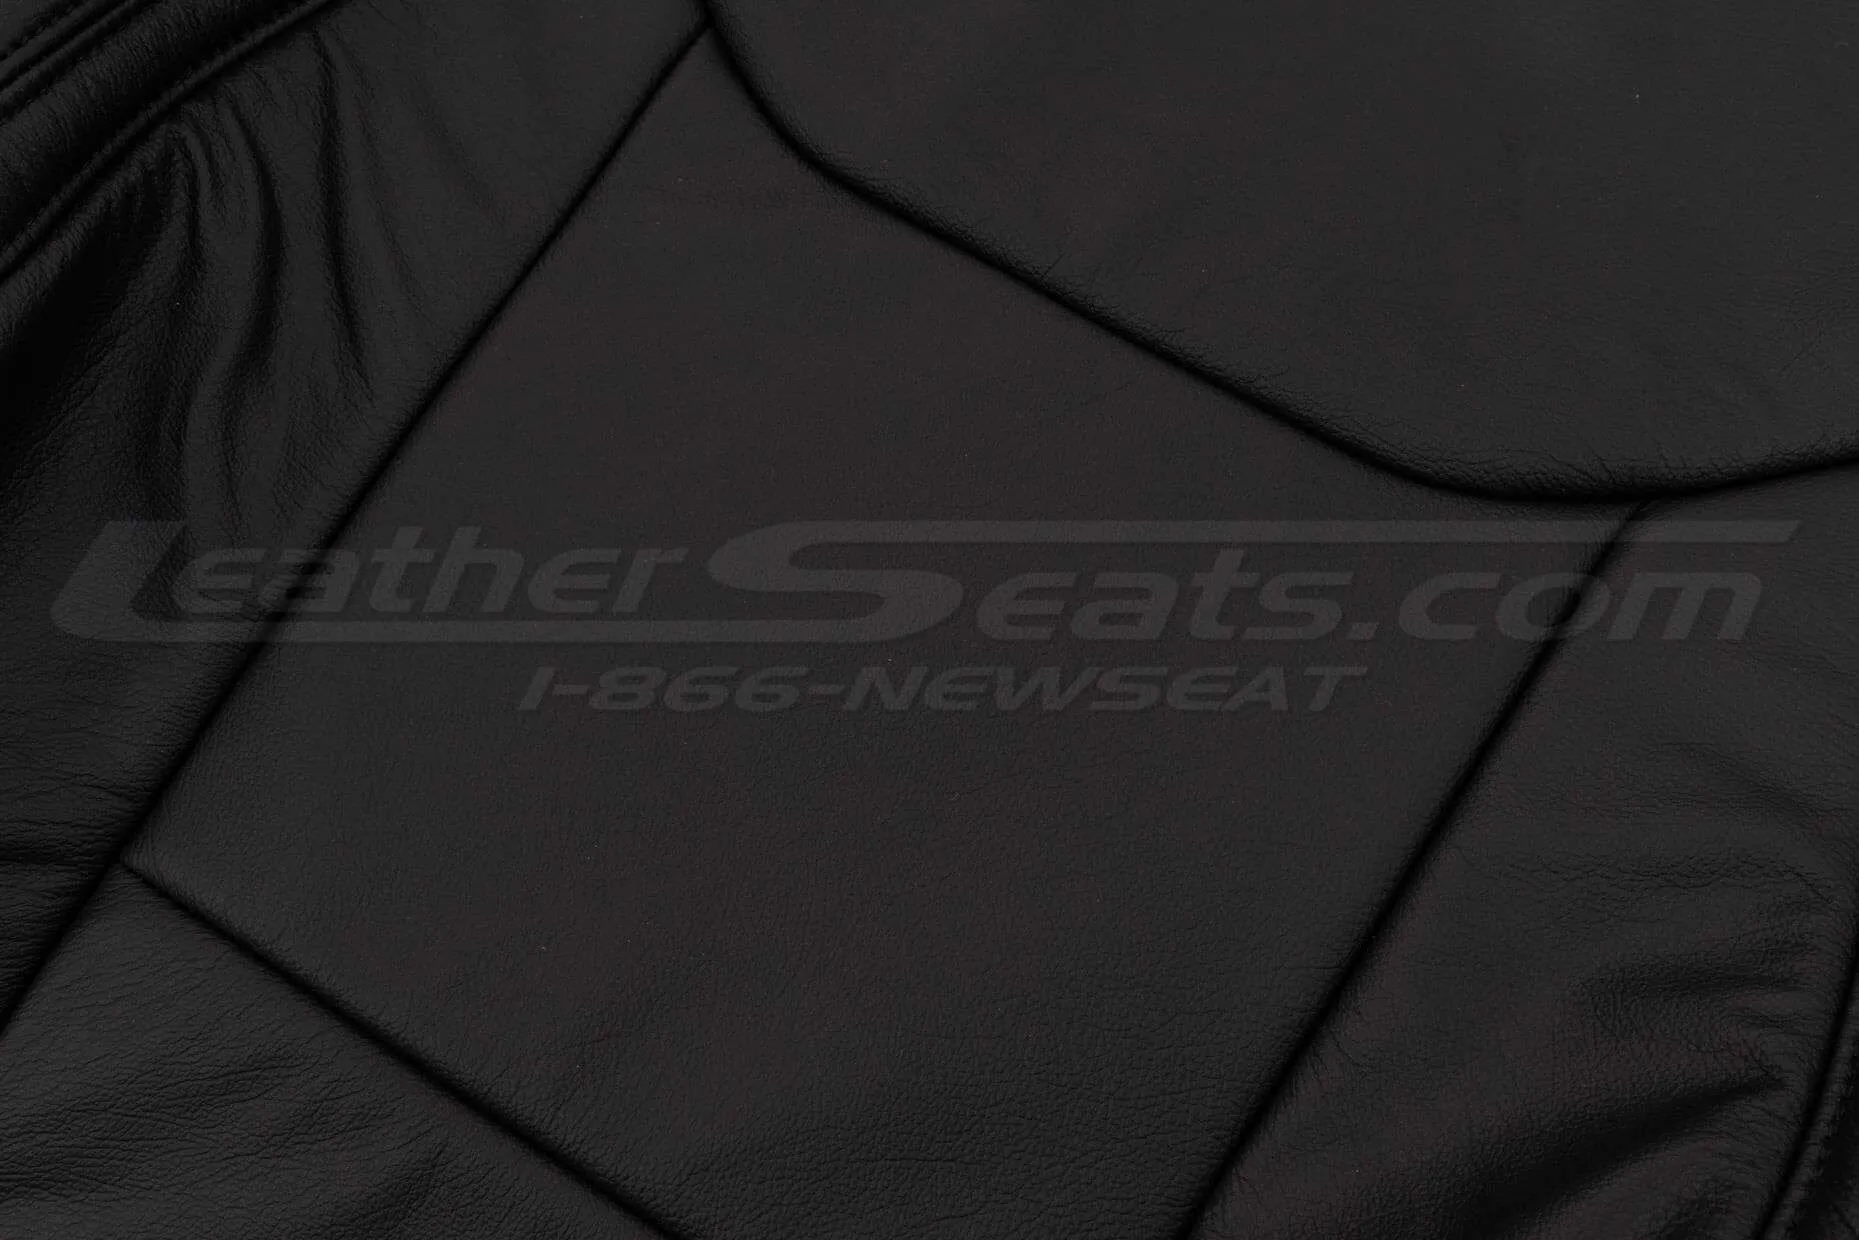 Alternative angle of backrest for leather texture